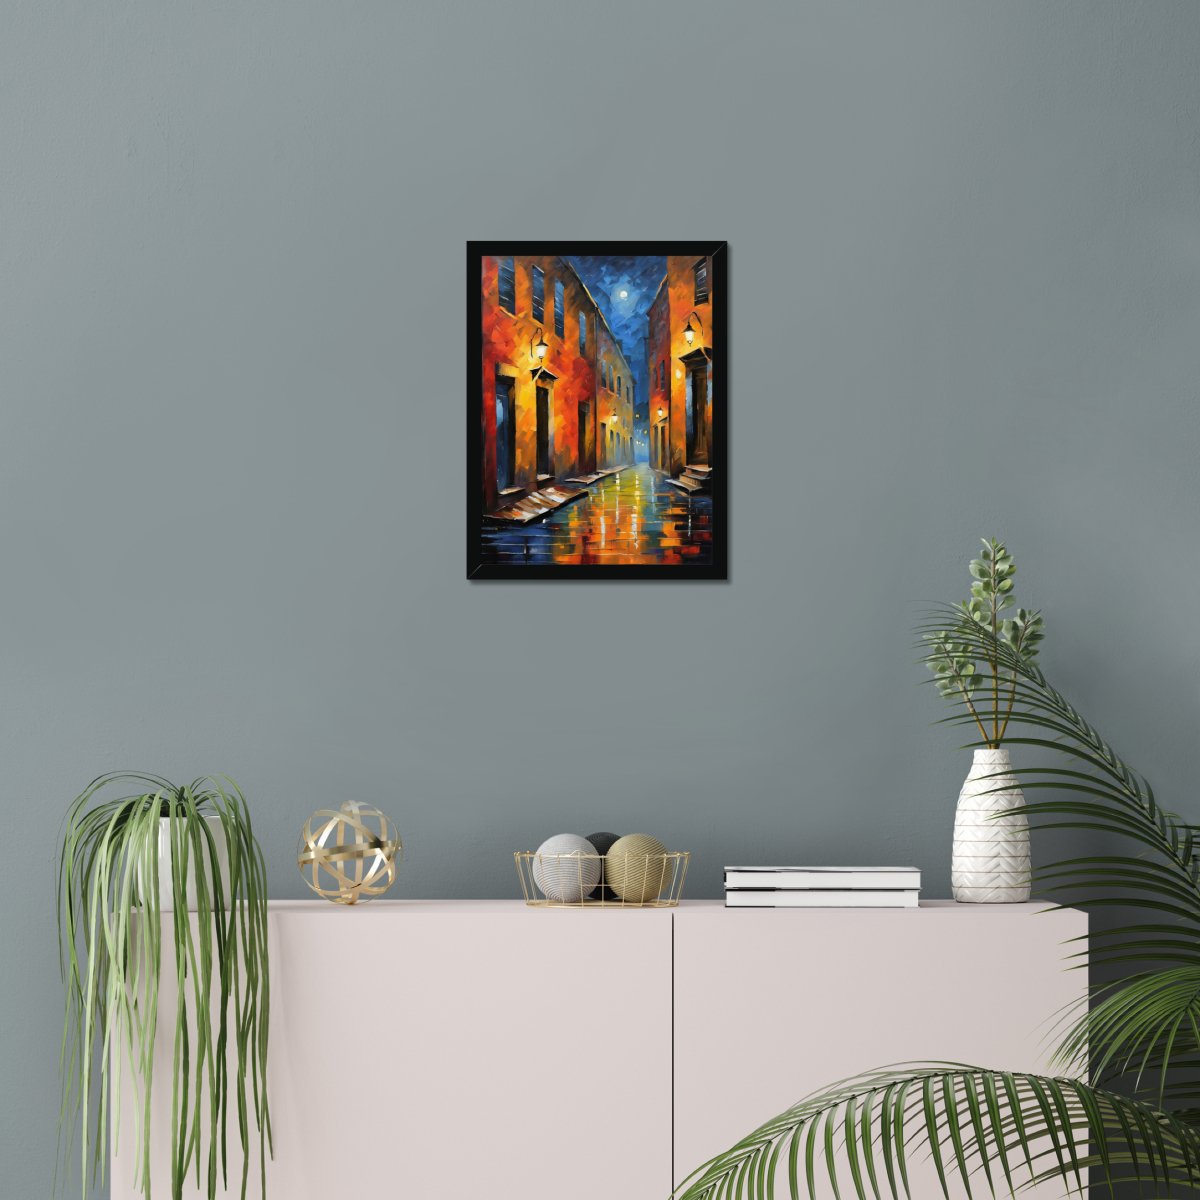 Desolate night alley - Art print - Poster - Ever colorful